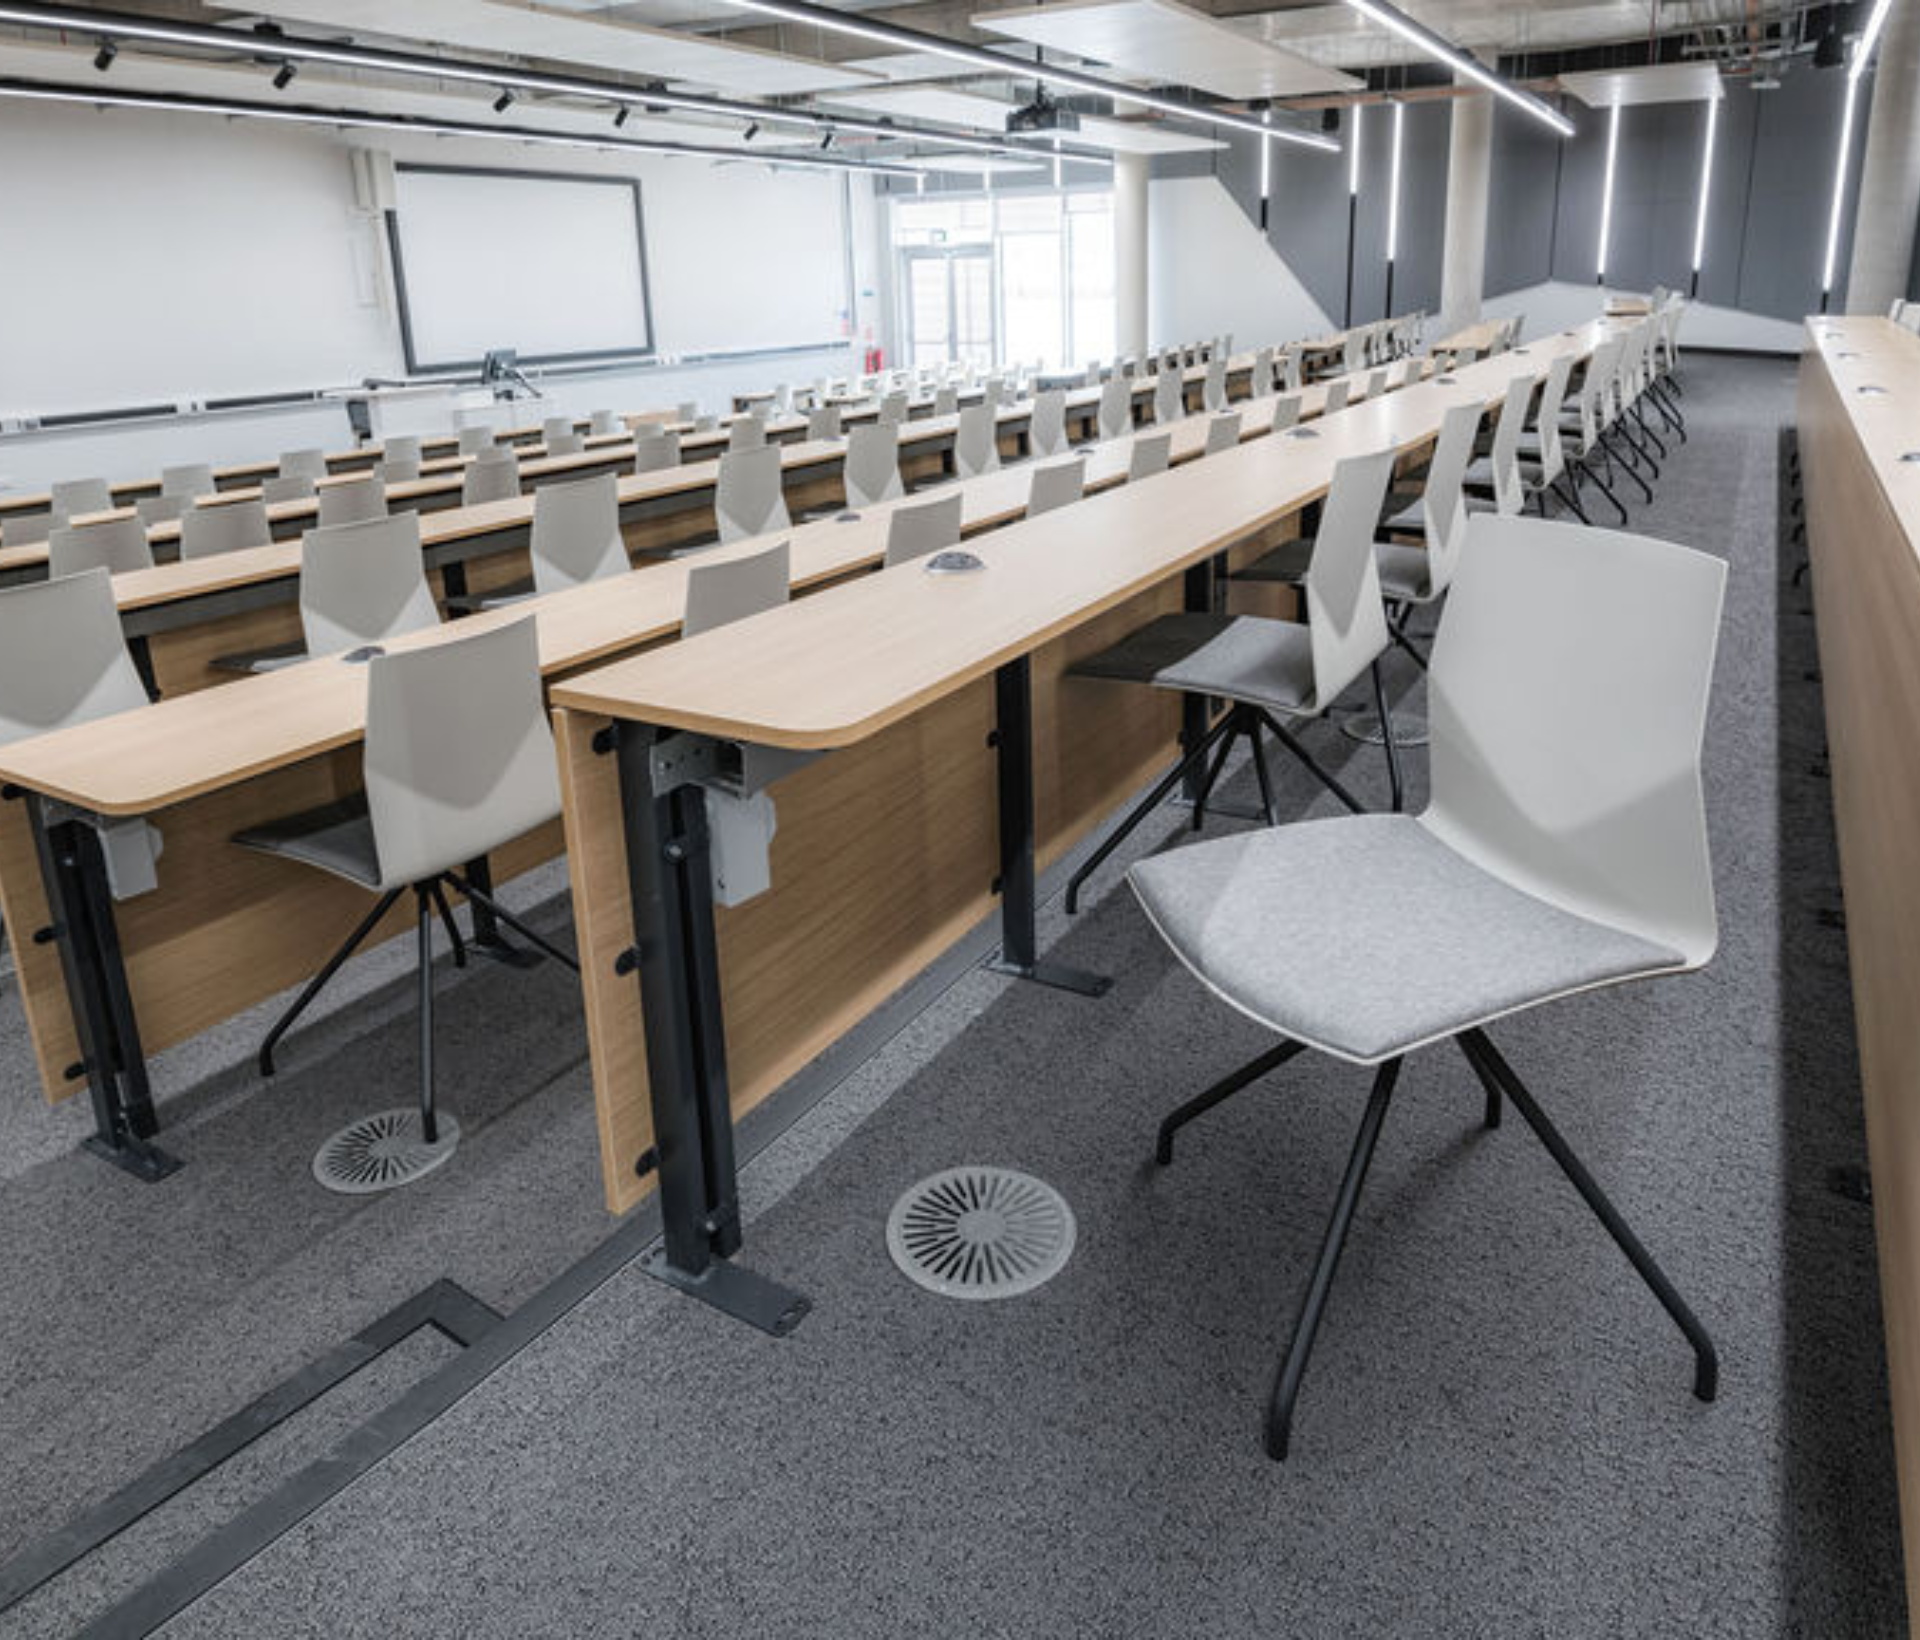 An empty lecture hall with chairs and a projector full of Ocee and Four Design office furniture at the University of Sheffield